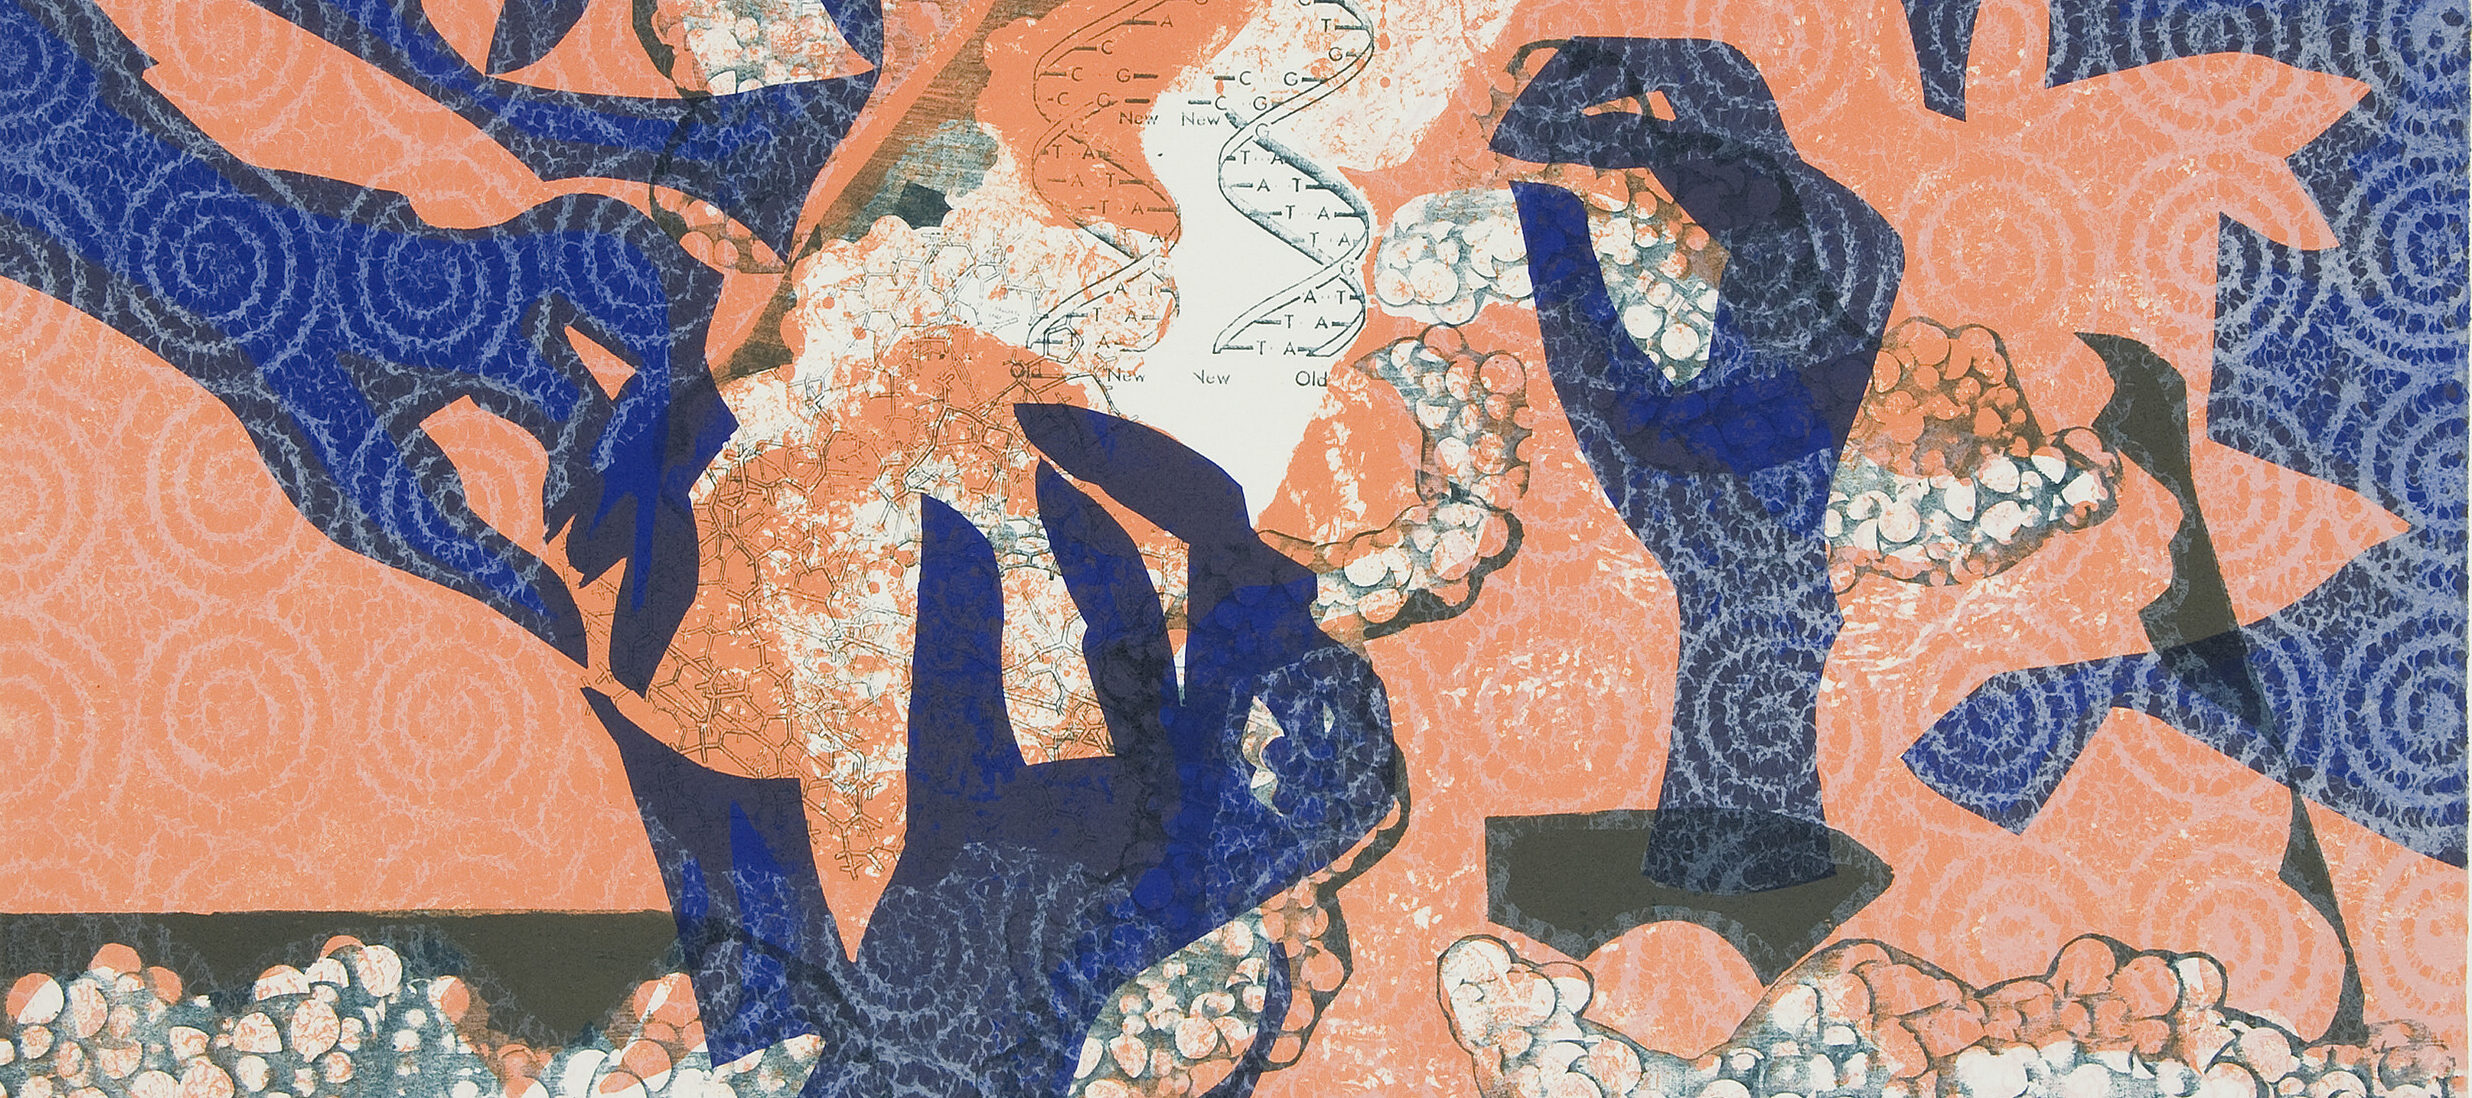 Cobalt, ghostly hands gently reaching toward the center of a painting against a salmon-colored background with another cobalt shape in the upper-right corner. Bubbly white textures and black shapes are layered over the cobalt and salmon, along with a grid of white spirals.